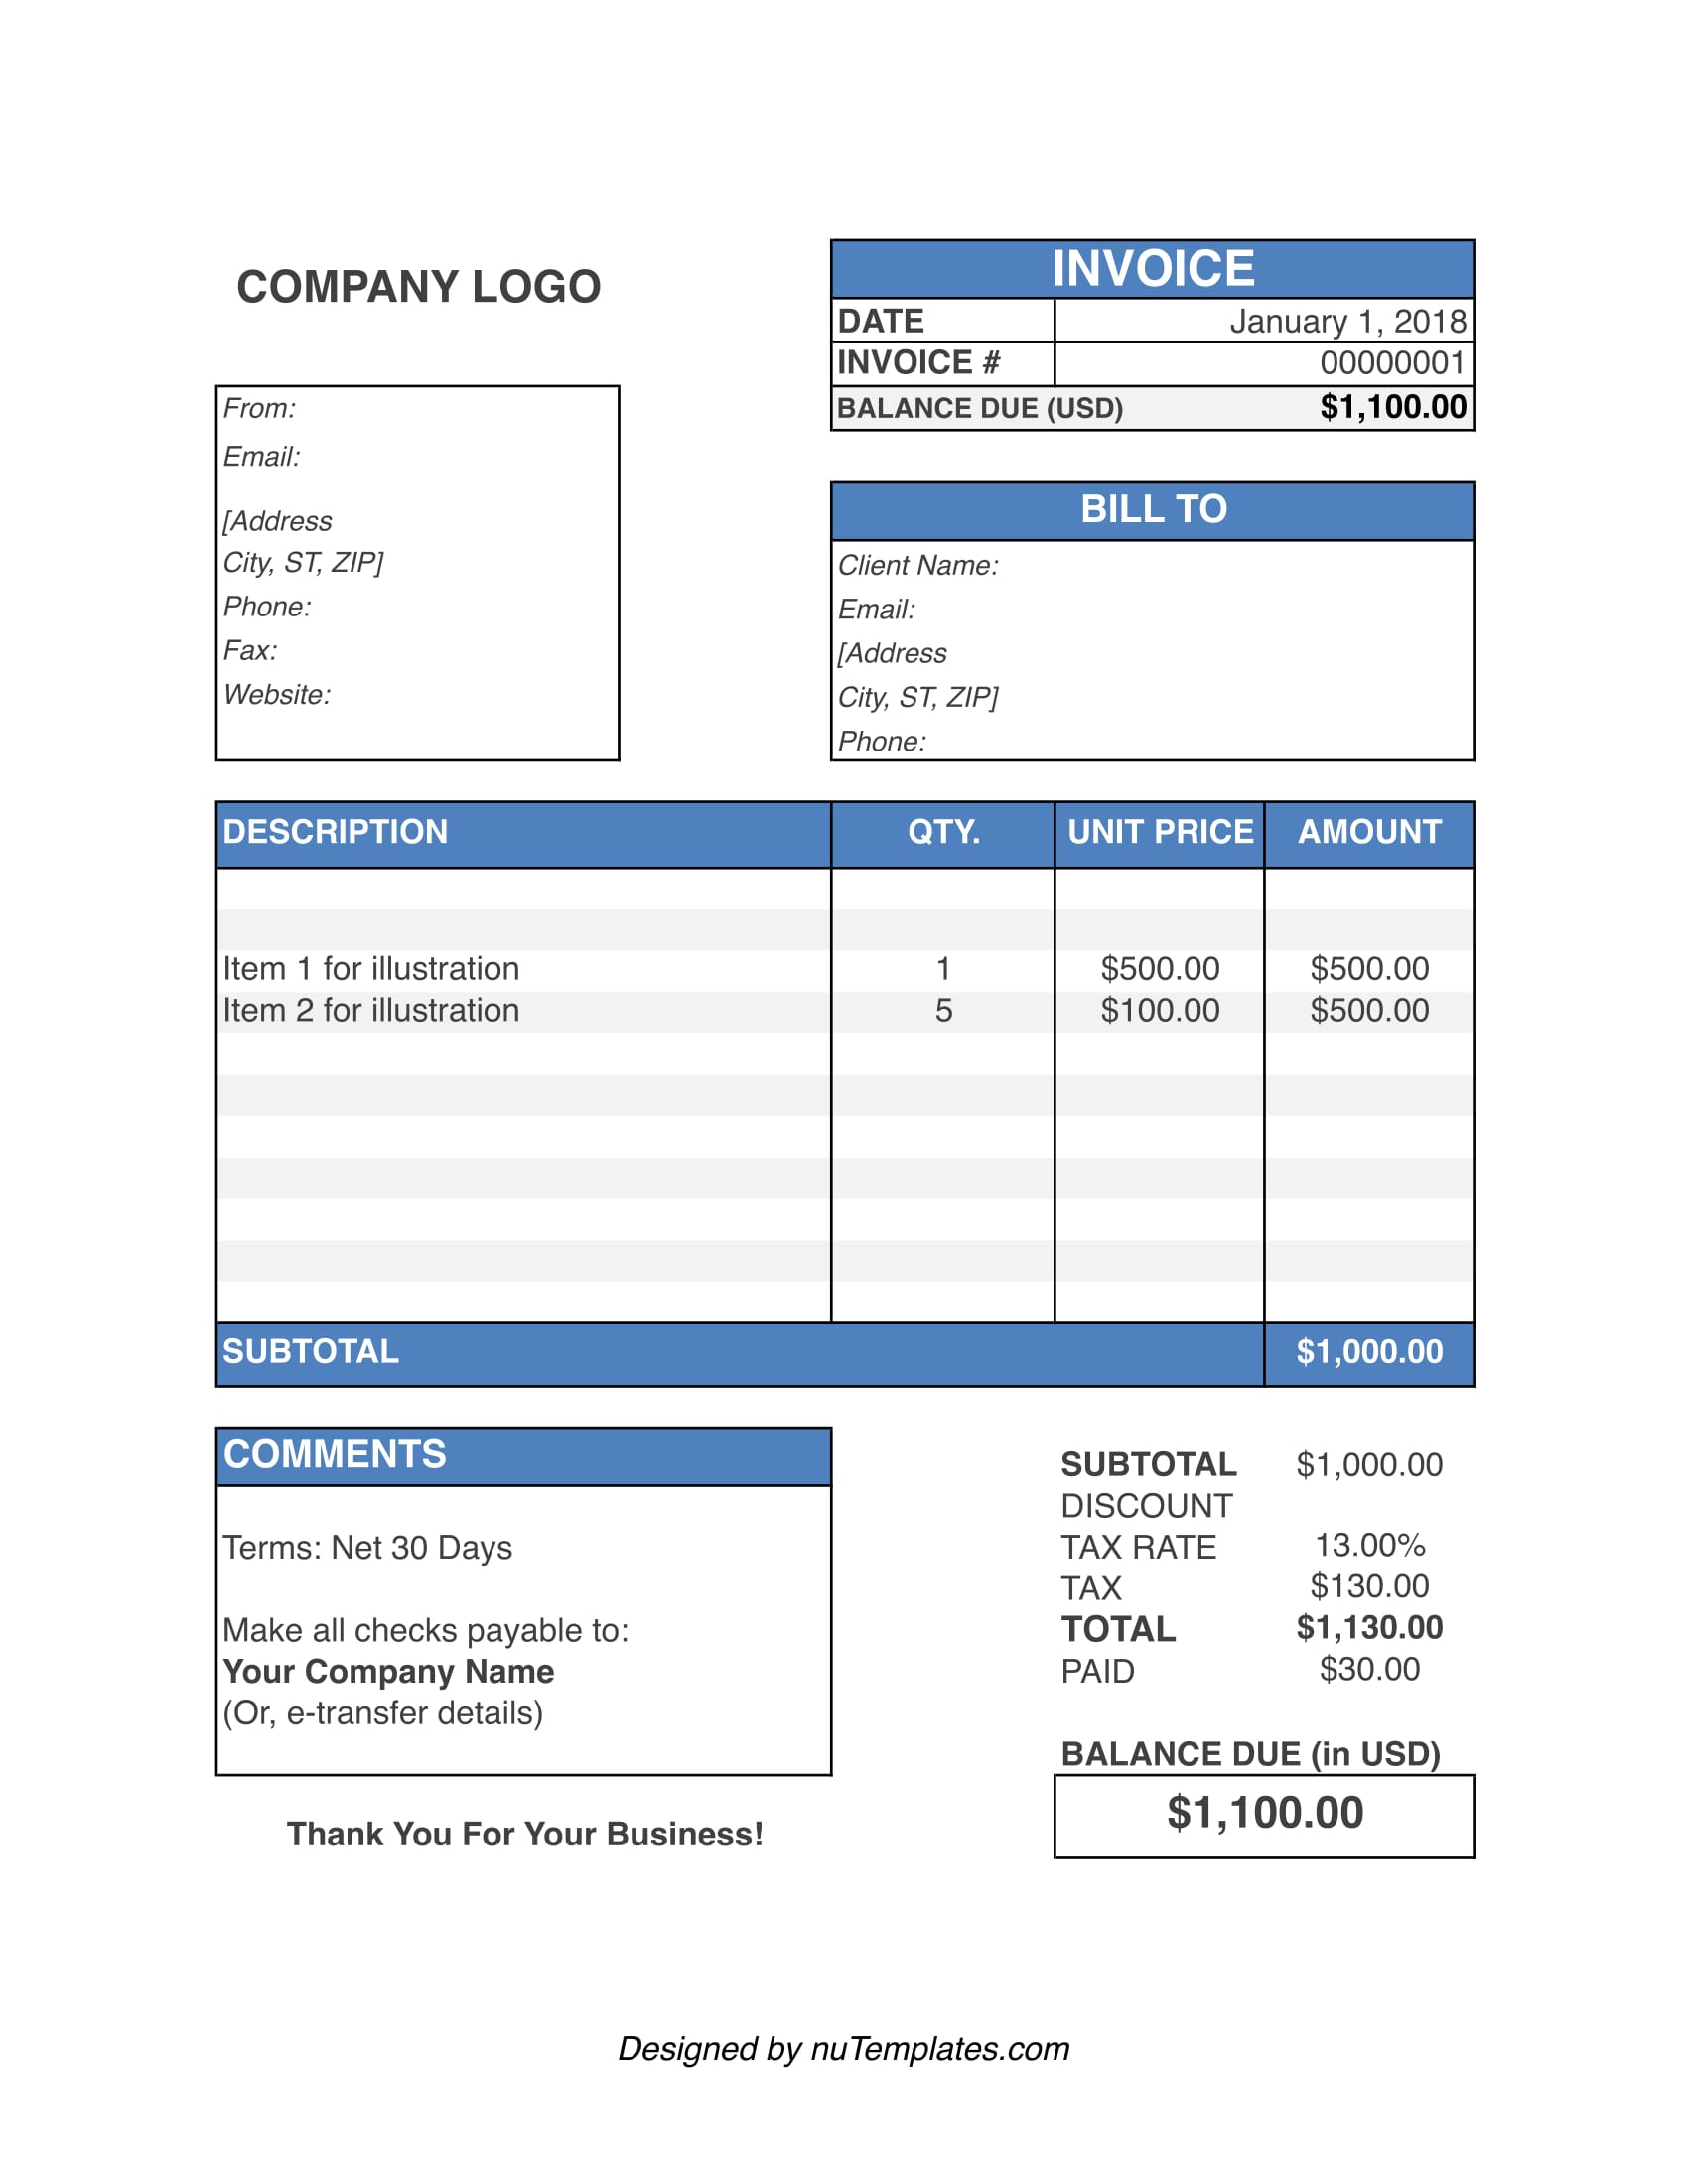 billing-invoice-template-billing-invoices-nutemplates